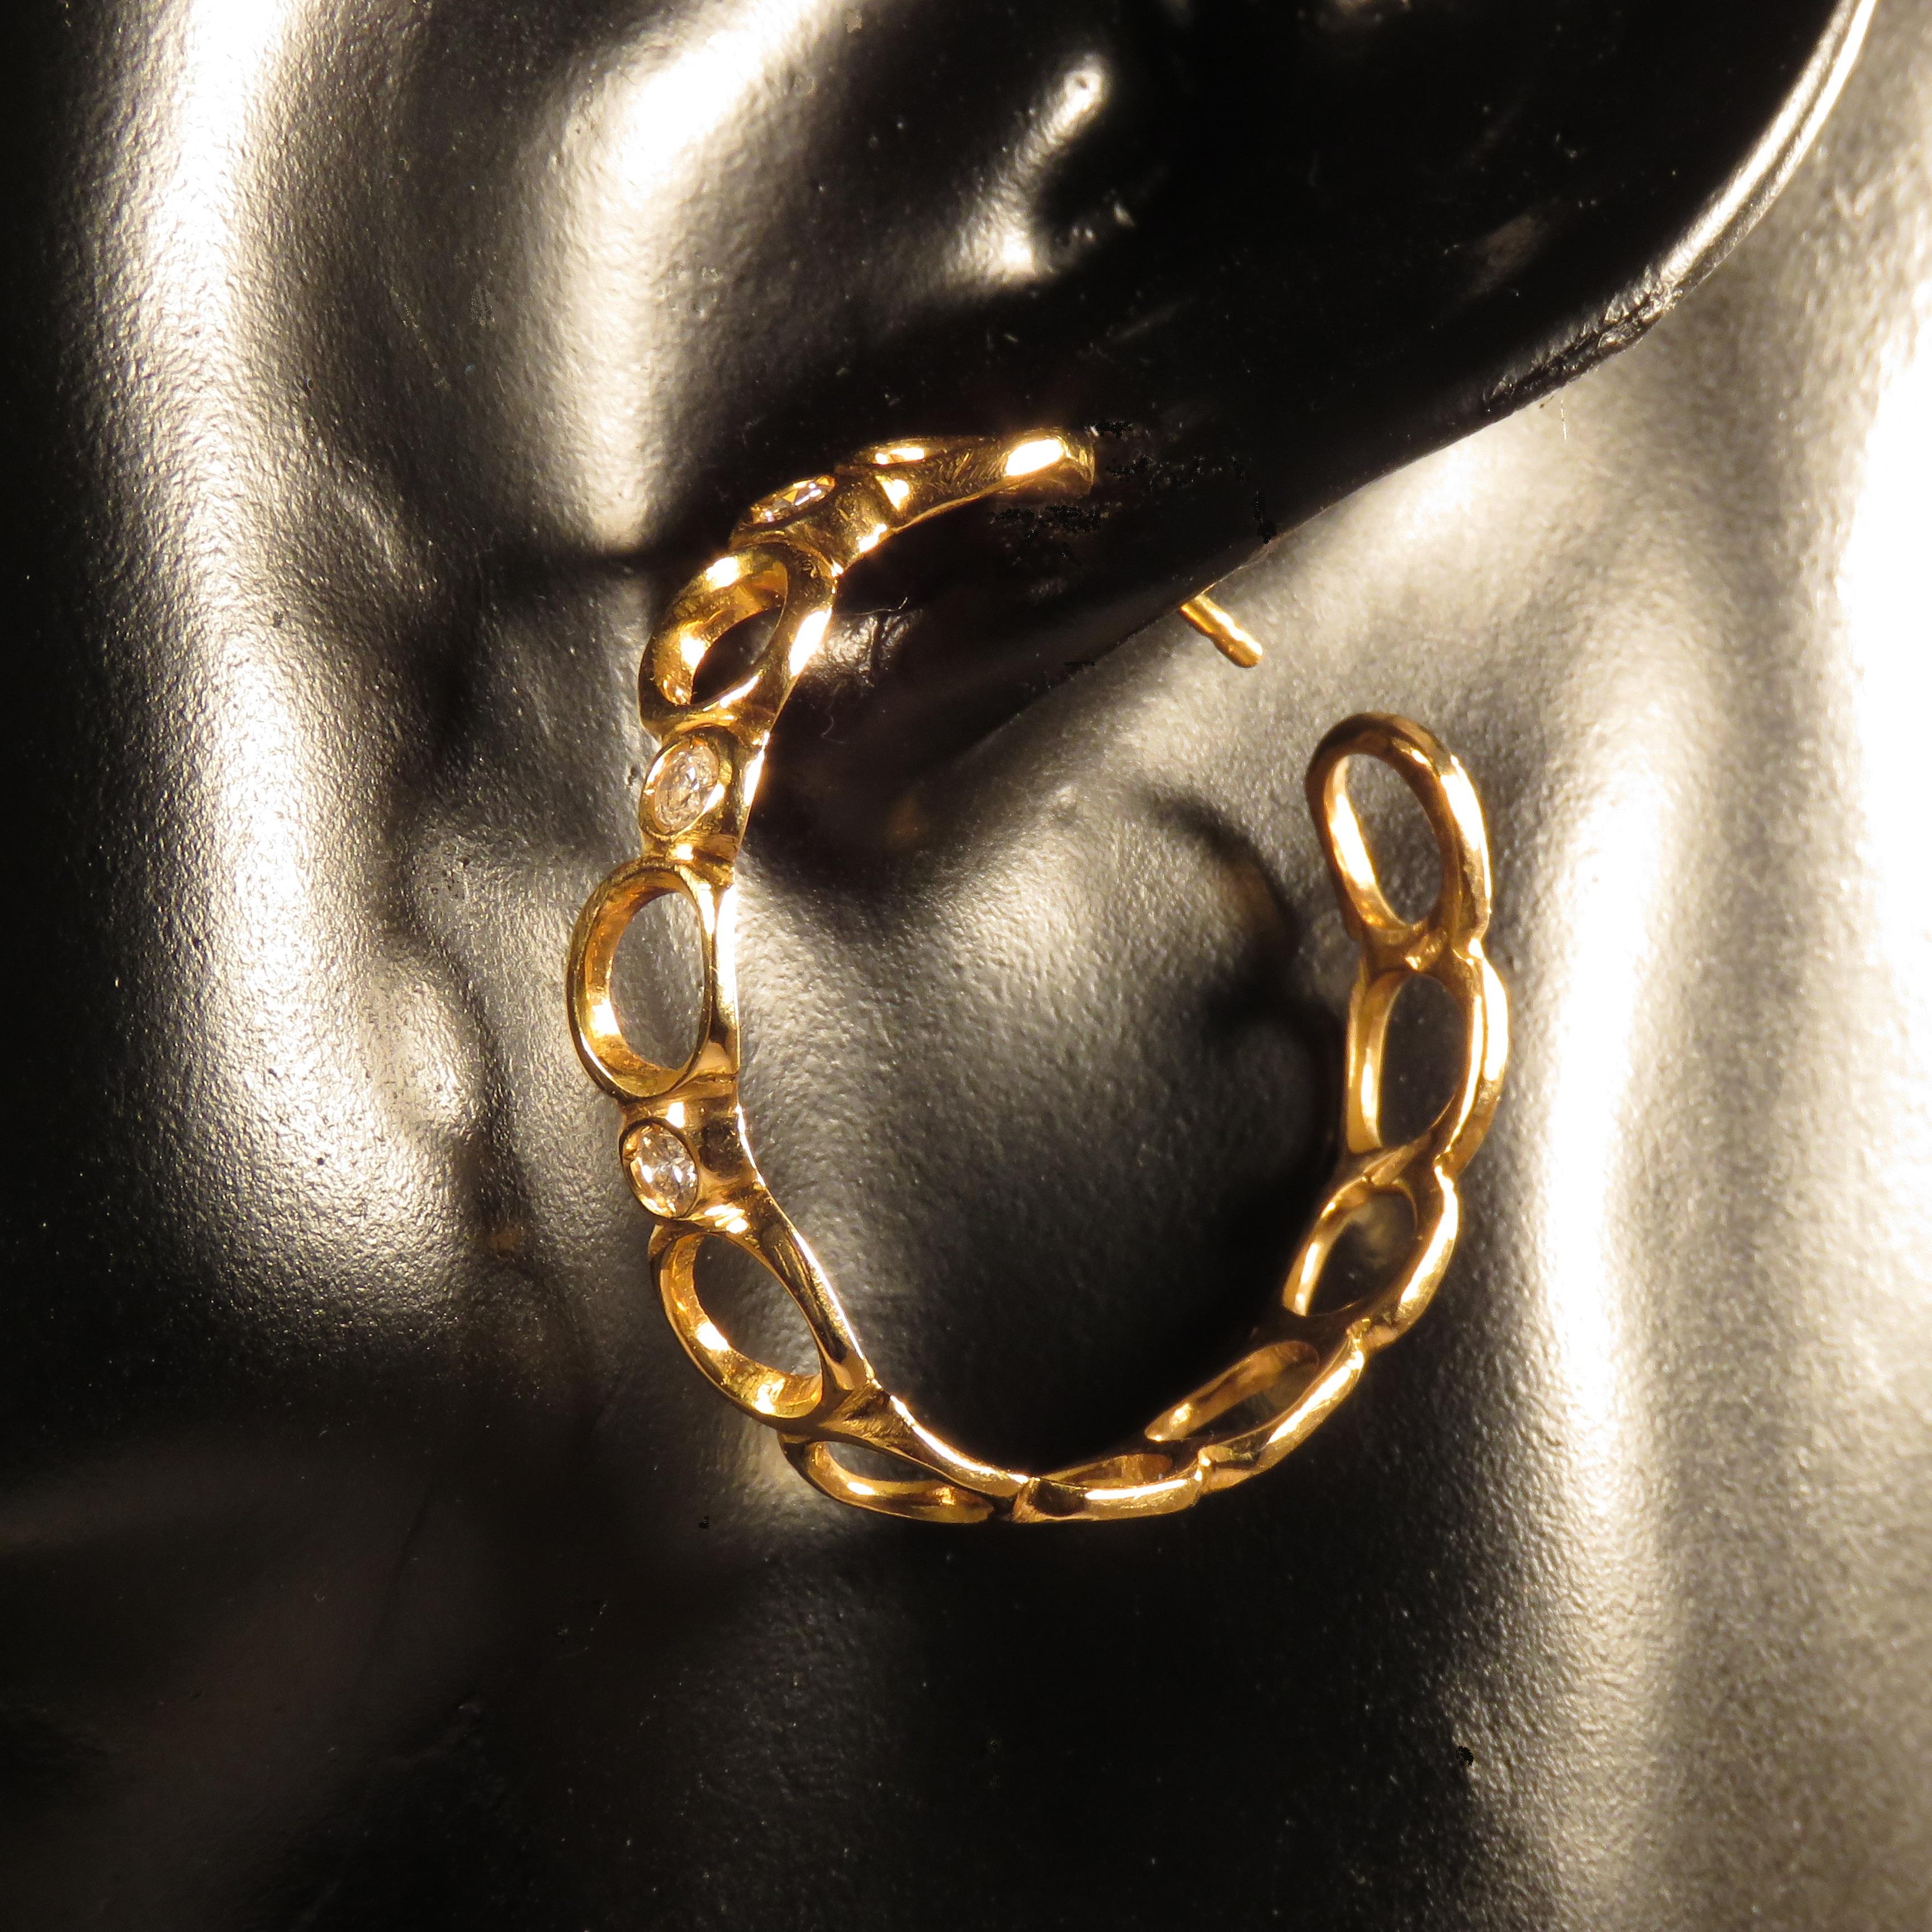 18 karat rose gold hoop earrings with six diamonds 0.40 ctw / color F clarity VS1.
The diameter of each earring is 33 mm / 1.299 inches. They are marked with the Italian Gold Mark 750 and Botta Gioielli brandmark